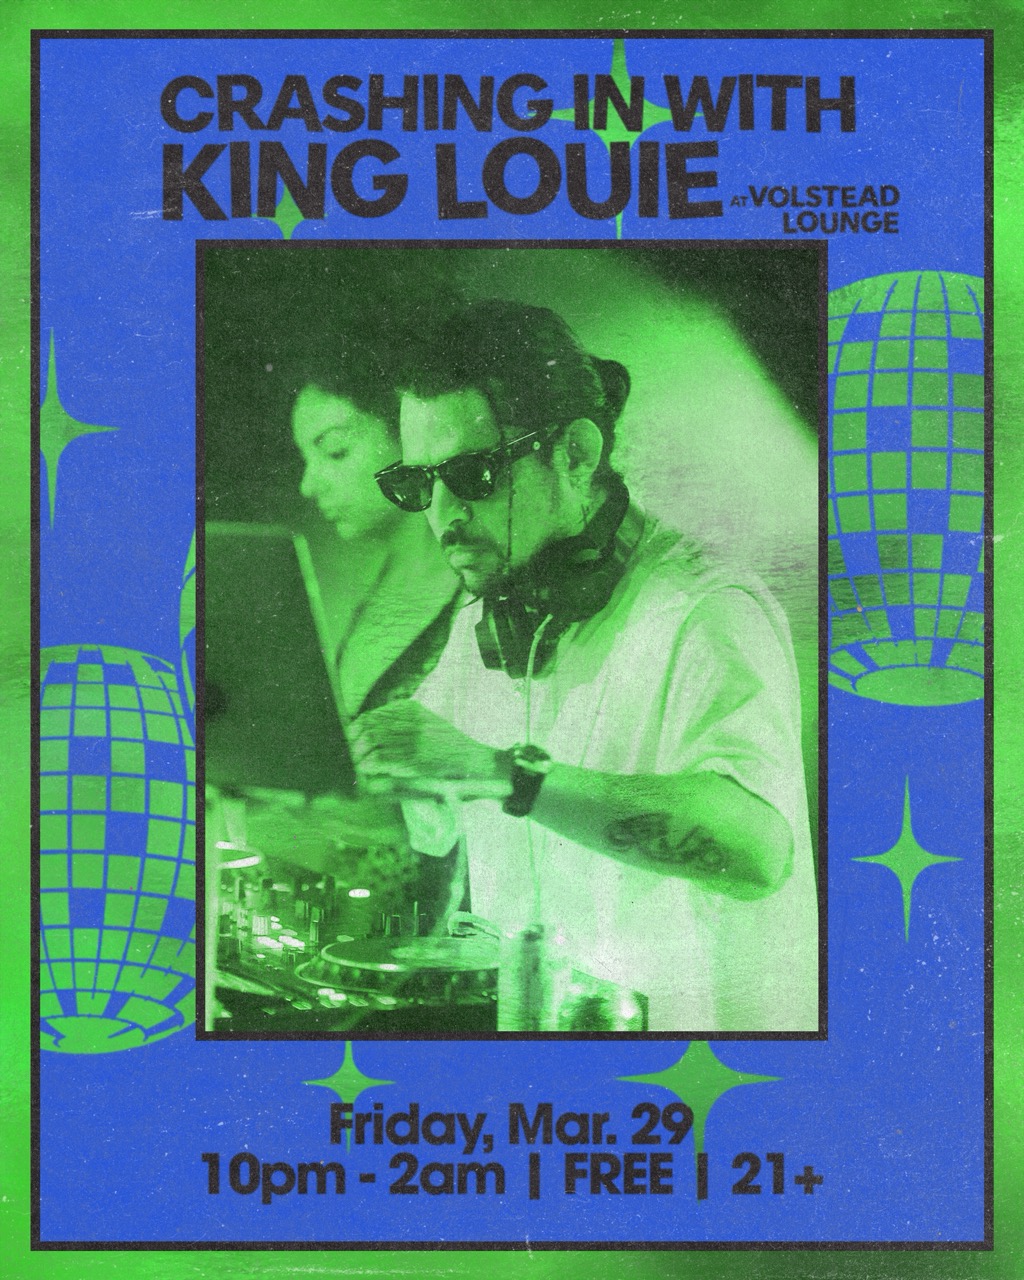 Crashing in with King Louie @ Volstead Lounge